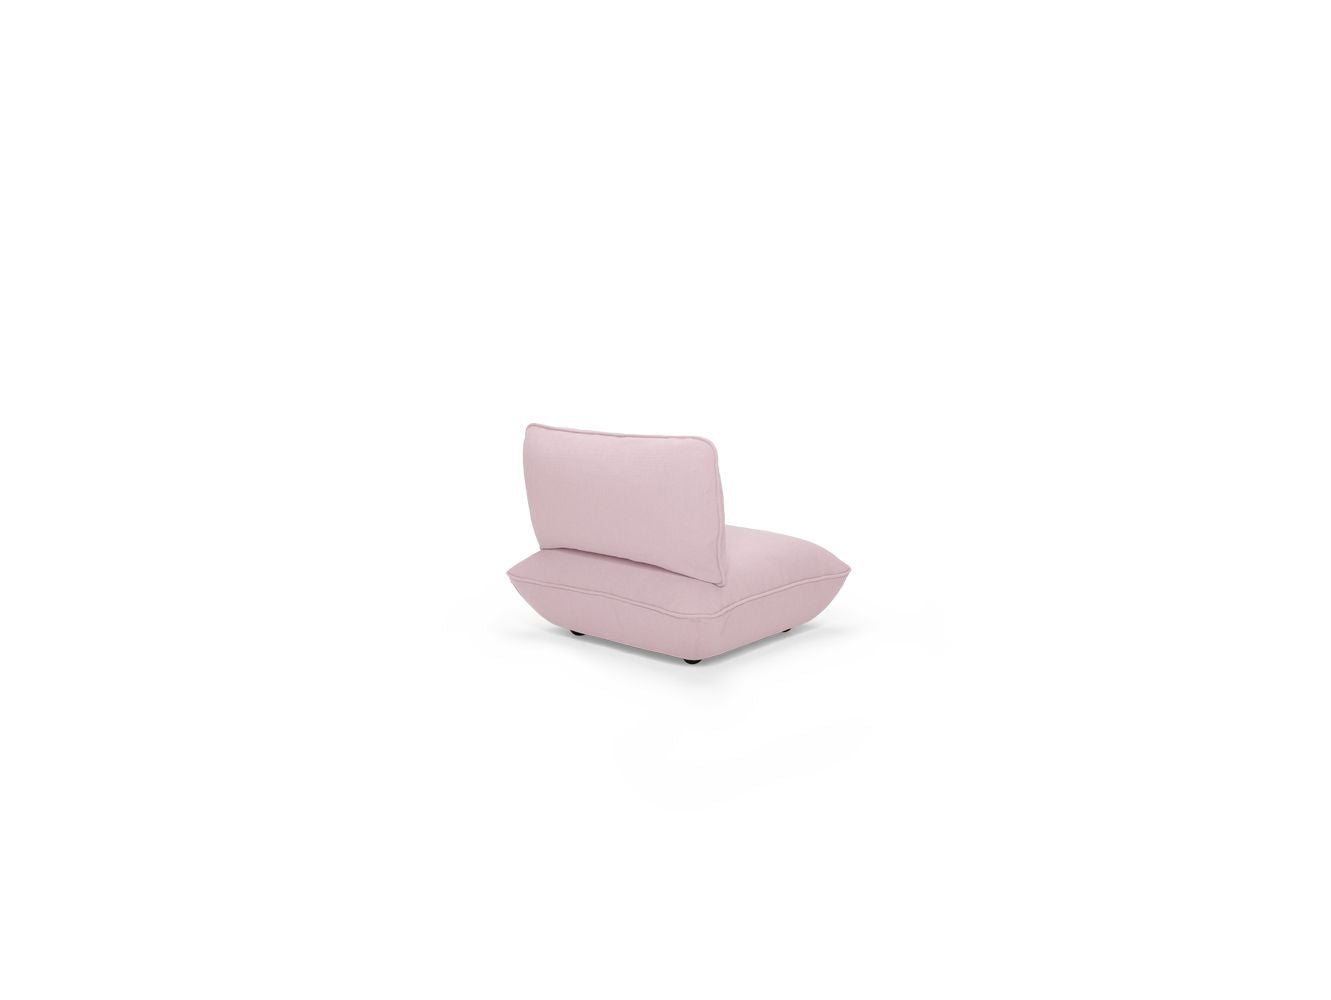 Fatboy Sumo Seat Item, Bubble Pink